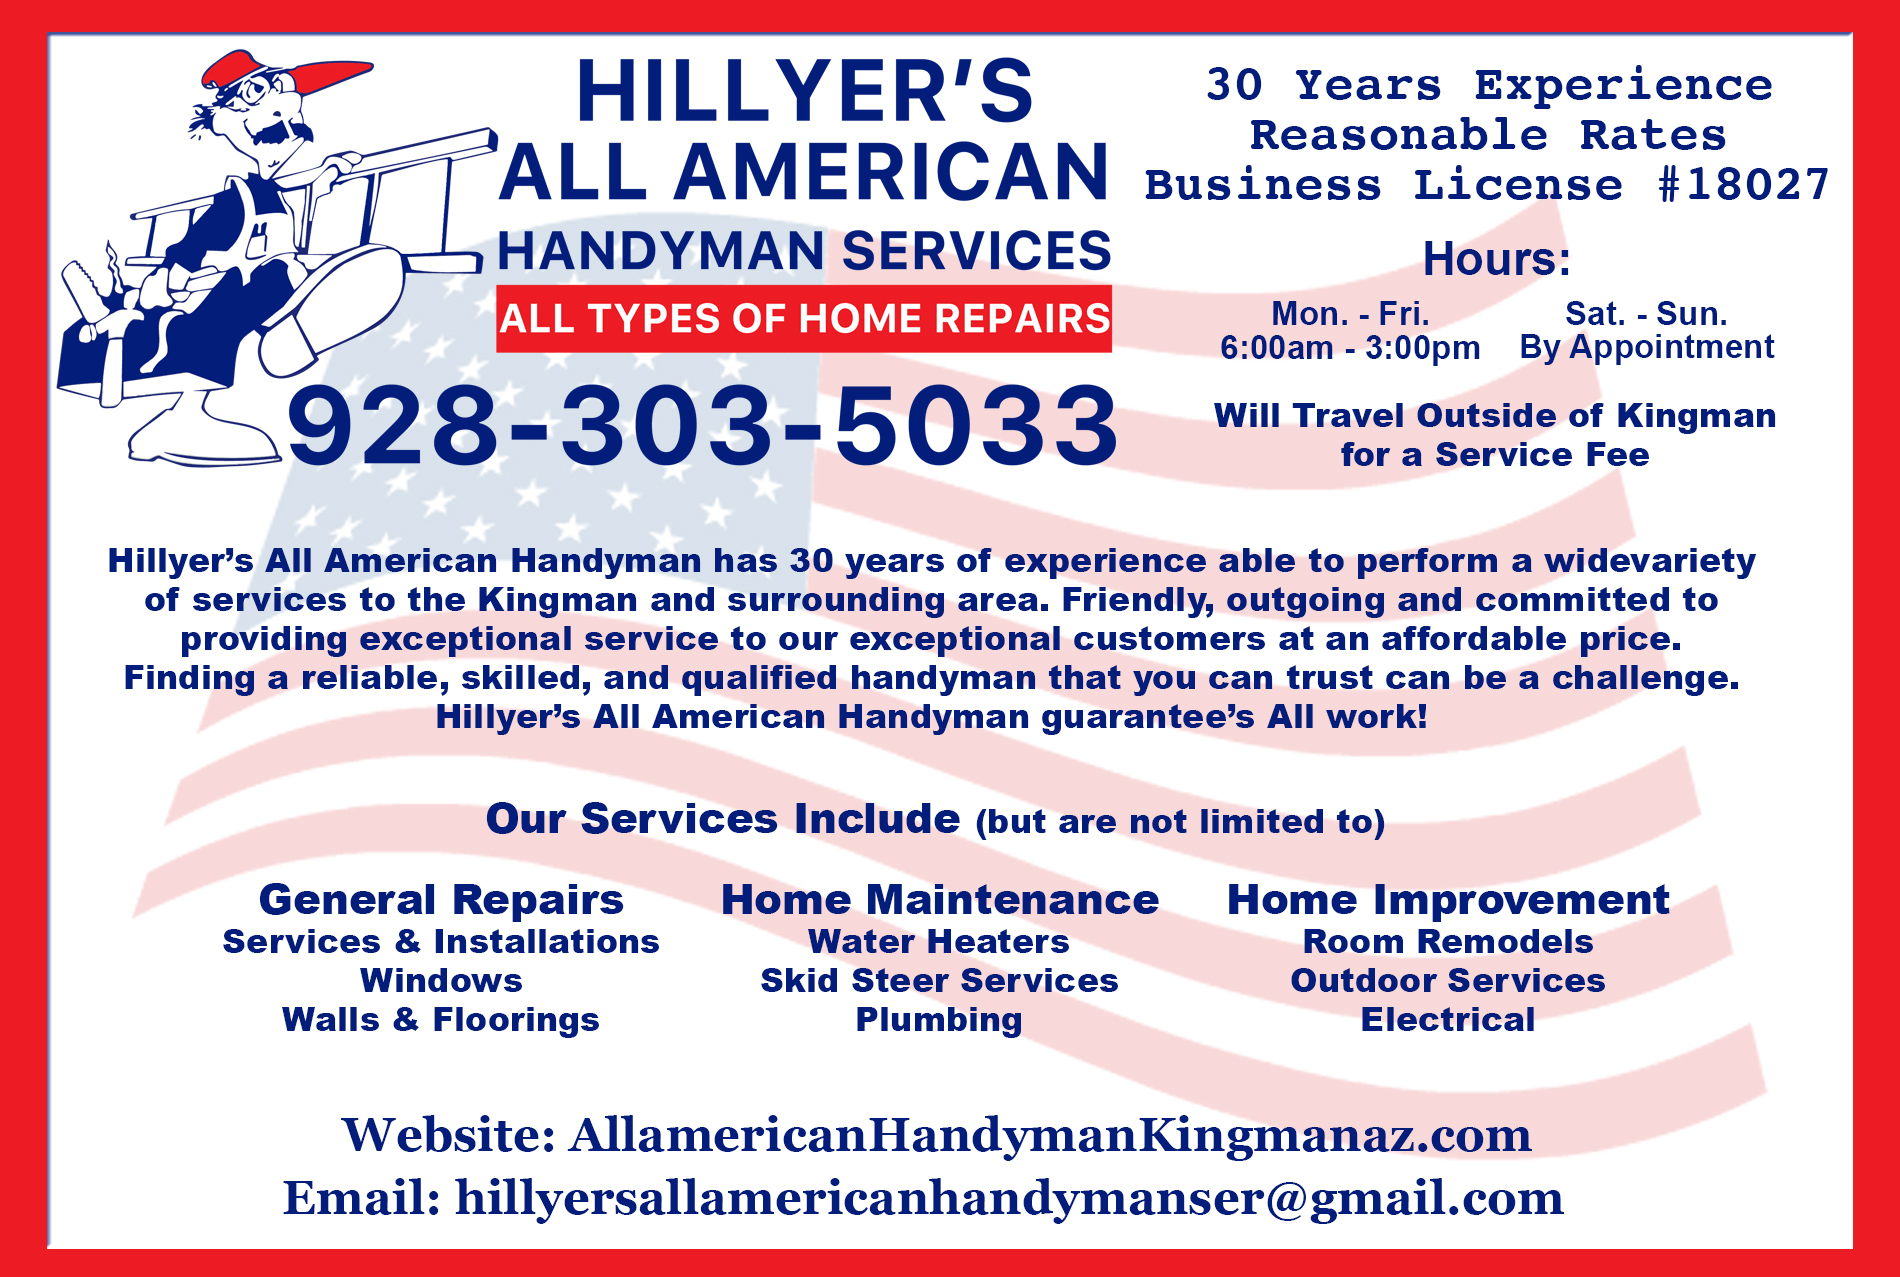 Hillyer's All American Handyman Services